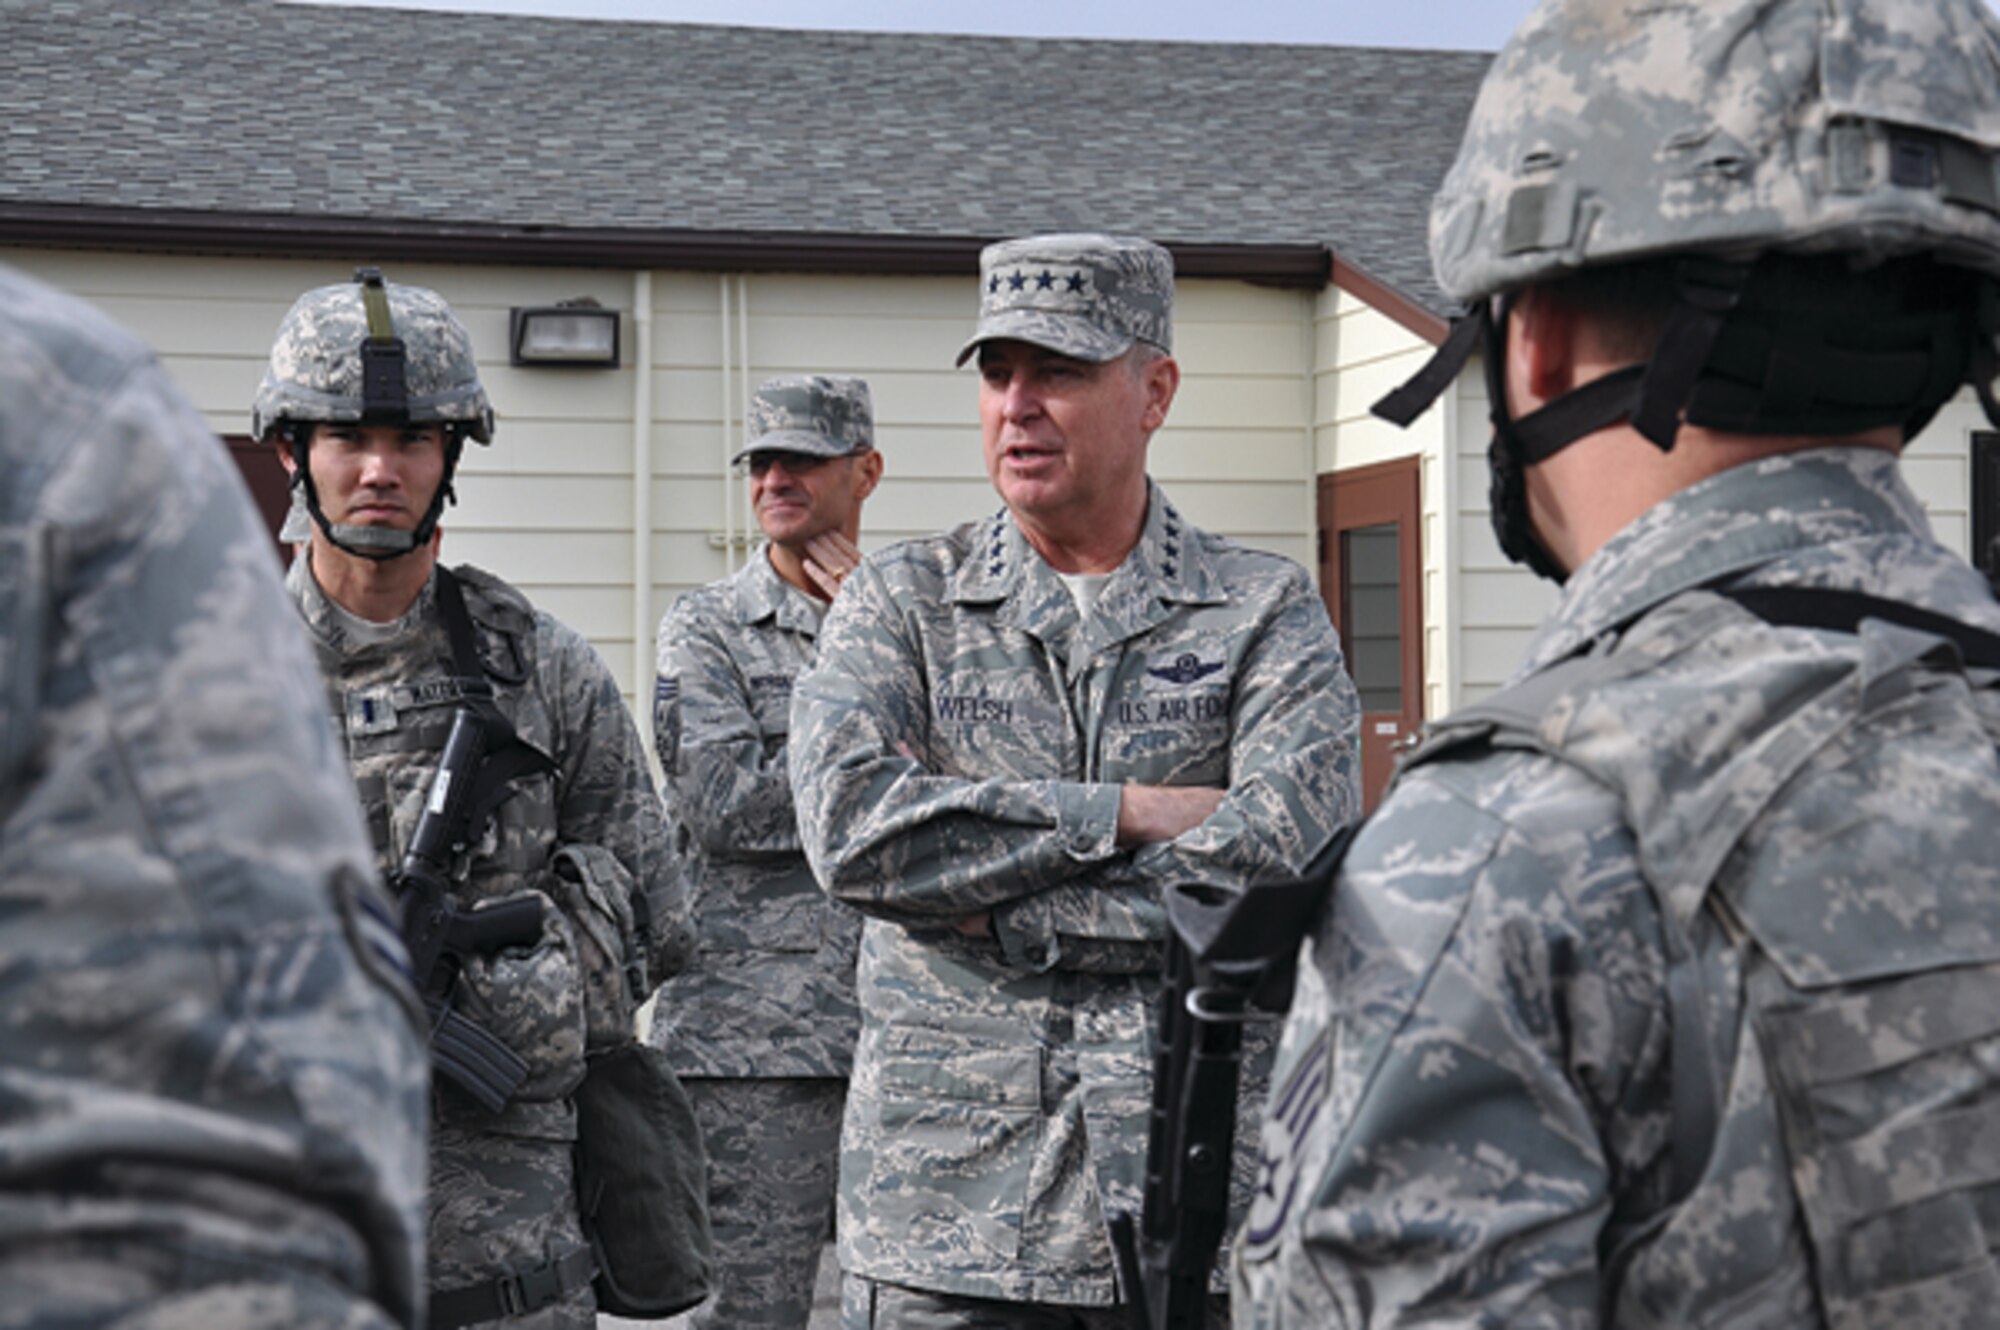 Air Force Chief of Staff Gen. Mark A. Welsh III talks with 1st Lt. Samuel Waterman, 90th Missile Security Forces Squadron and other Airmen representing the different functions of the 90th Security Forces Group Nov. 19 at Missile Alert Facility Echo-01. This is Welsh’s first tour of the nation’s intercontinental ballistic missile force and his first visit to Warren as the chief of staff. (U.S. Air Force photo by 2nd Lt. Christen Downing) 